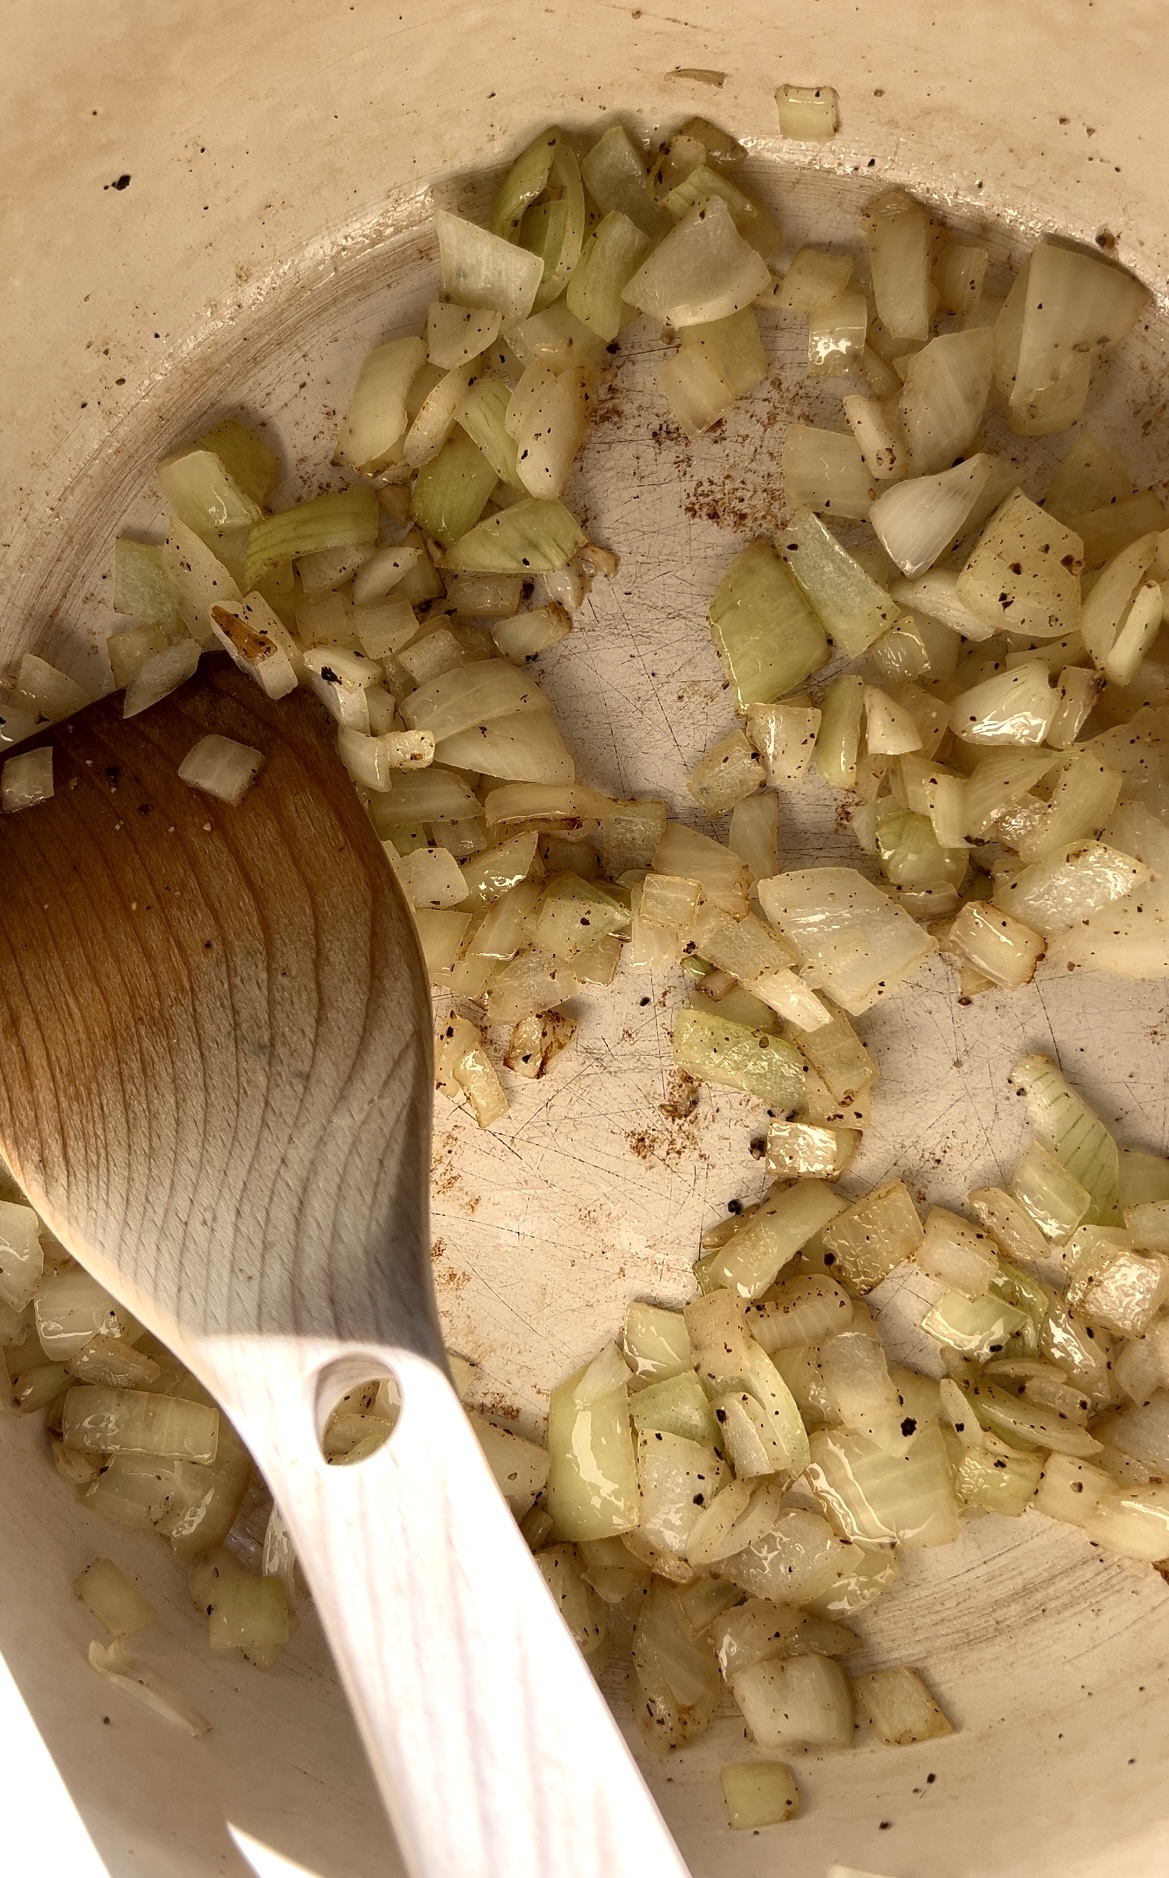 Diced onions in a large pot being sauteed with a wooden spoon.